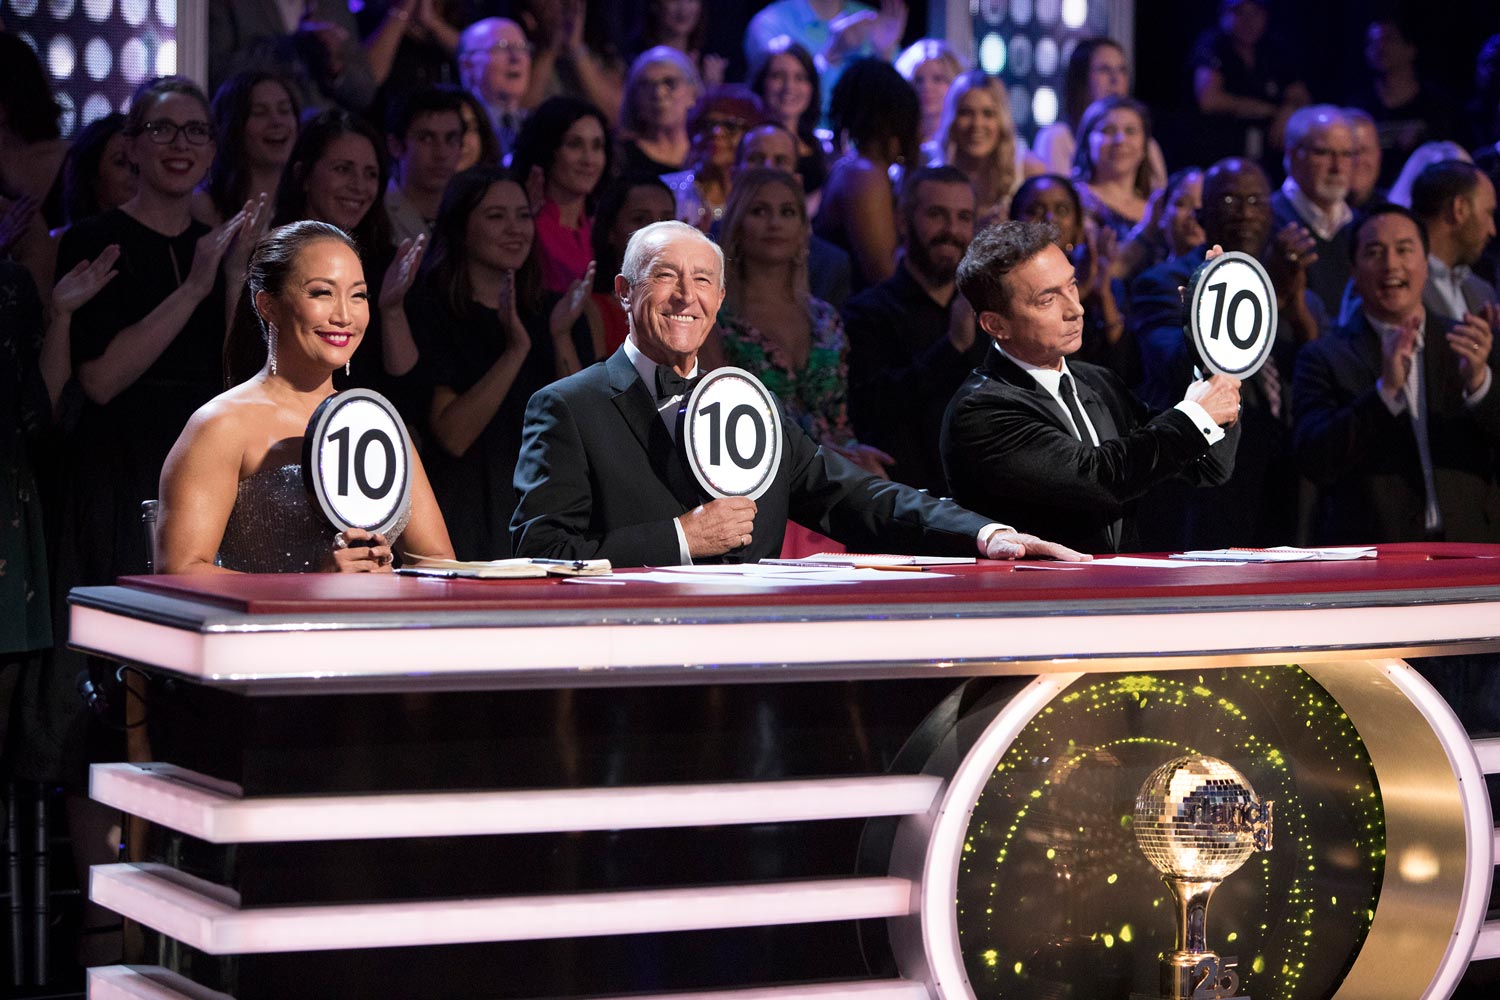 Judges of Dancing with the Stars all holding tens